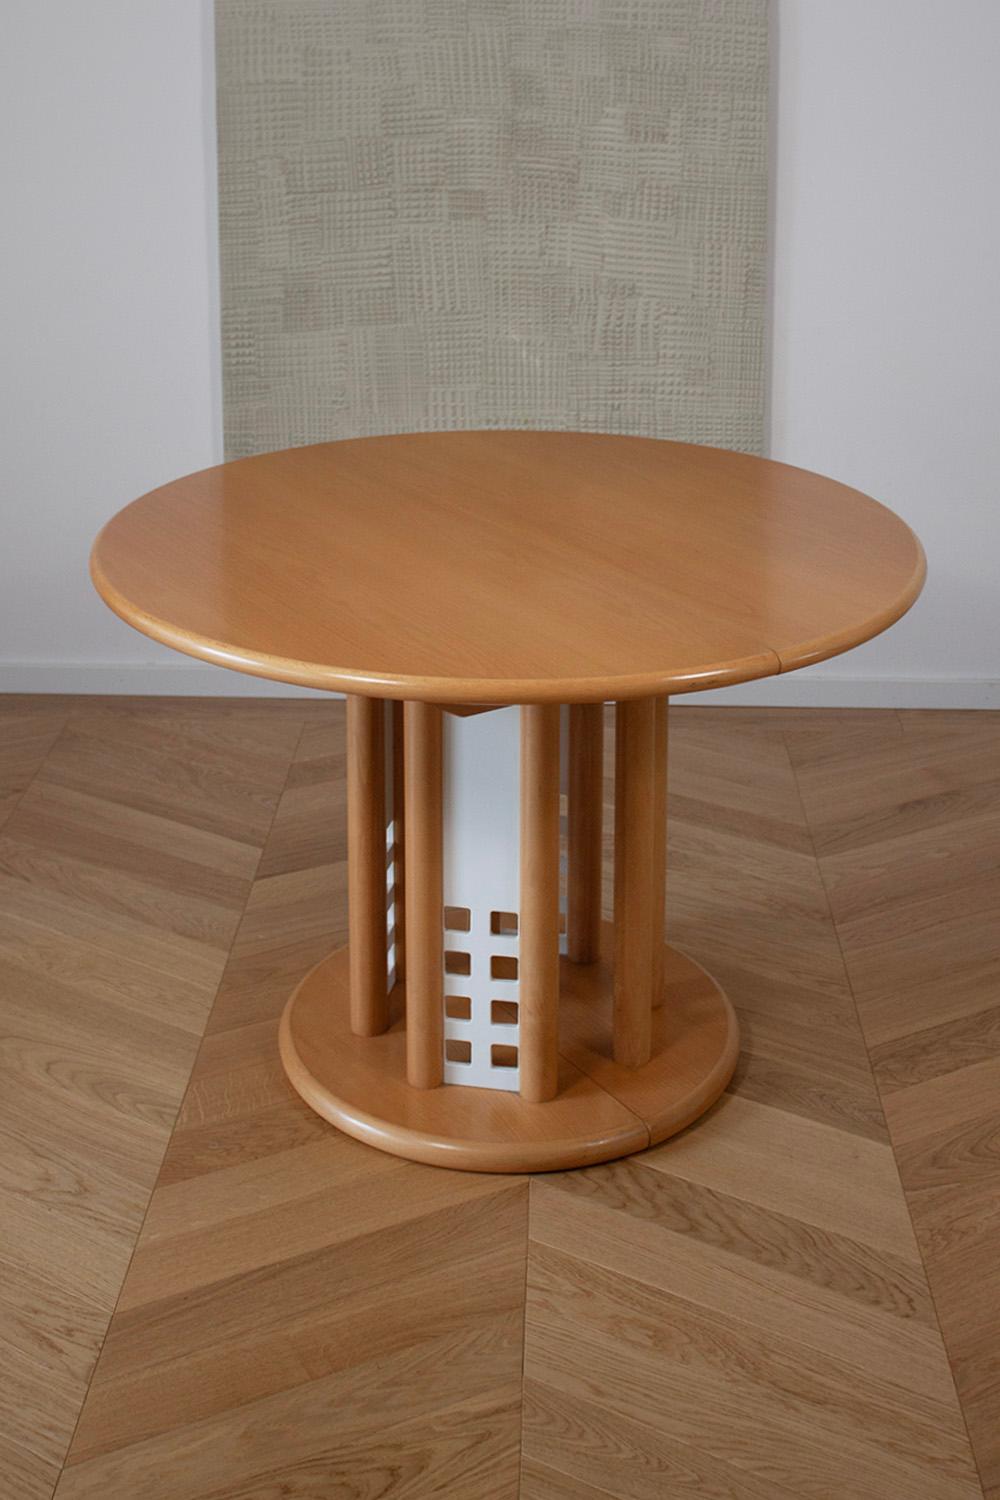 This very rare extendable Thonet table is a classic 1990 Design. The Table is made from beech wood and has 4 interesting white metal panels at the base, which give it that 90s feel. The table is in great condition with almost no scratches or